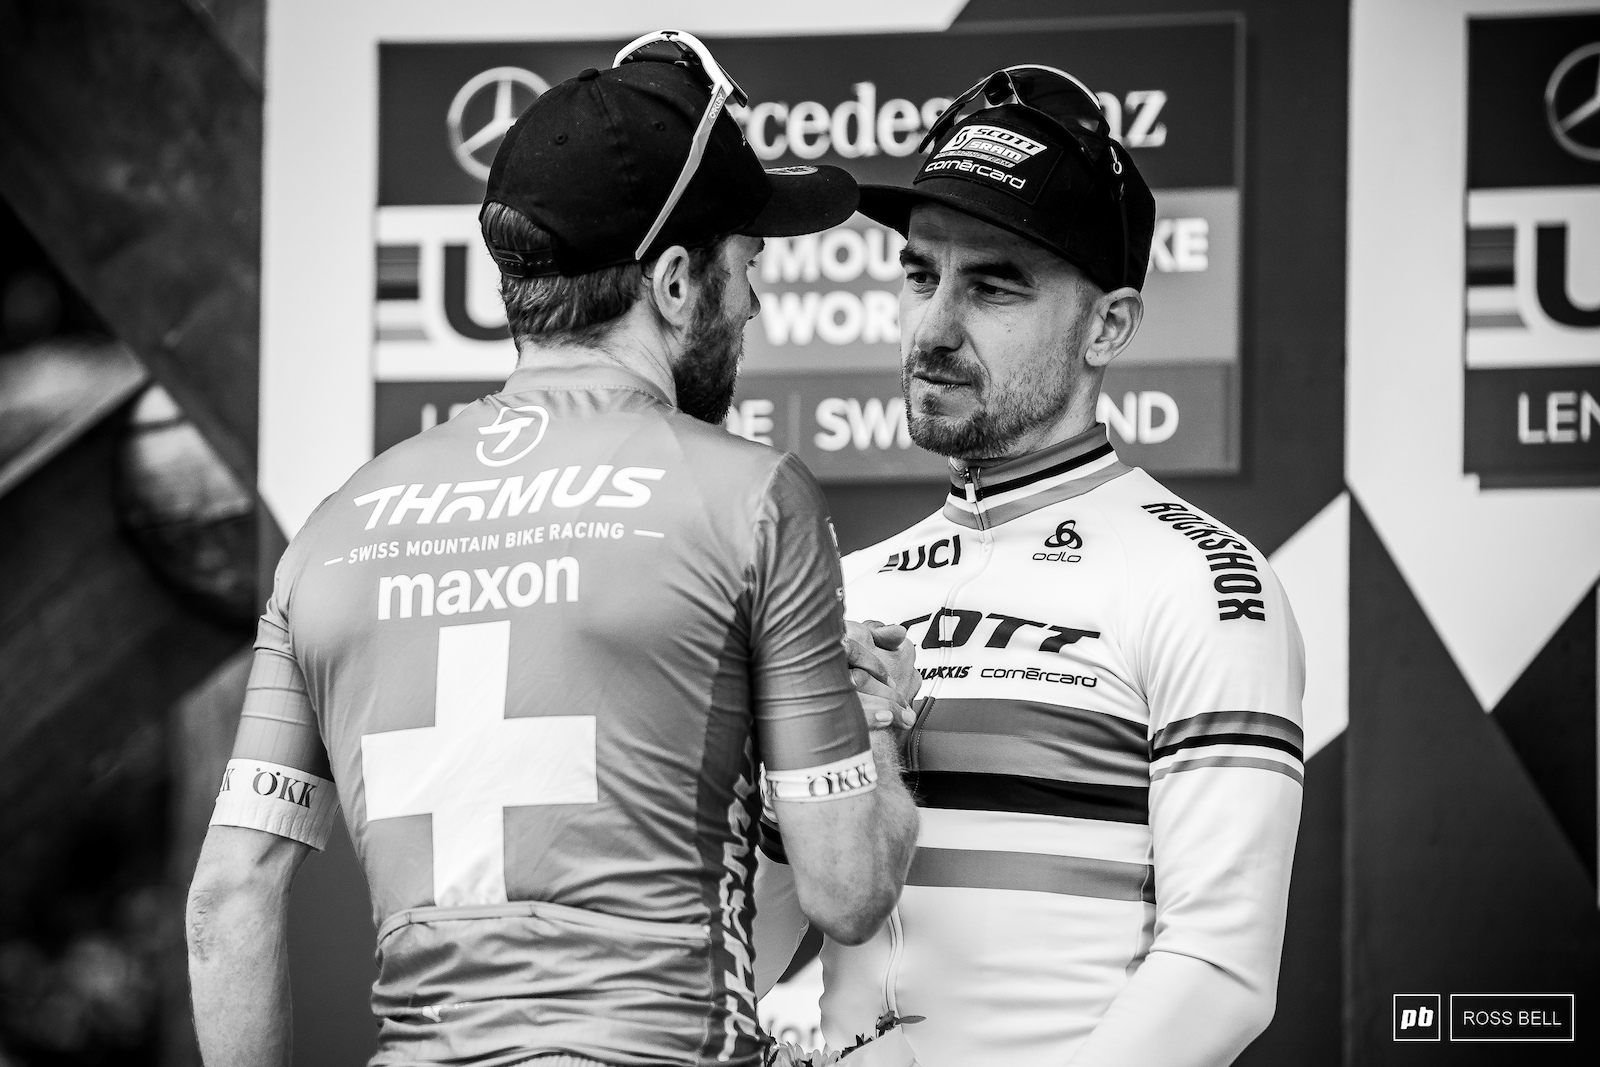 There was another lengthy exchange between Mathias Fluckiger and Nino Schurter on the podium this time a little less heated but still frosty.